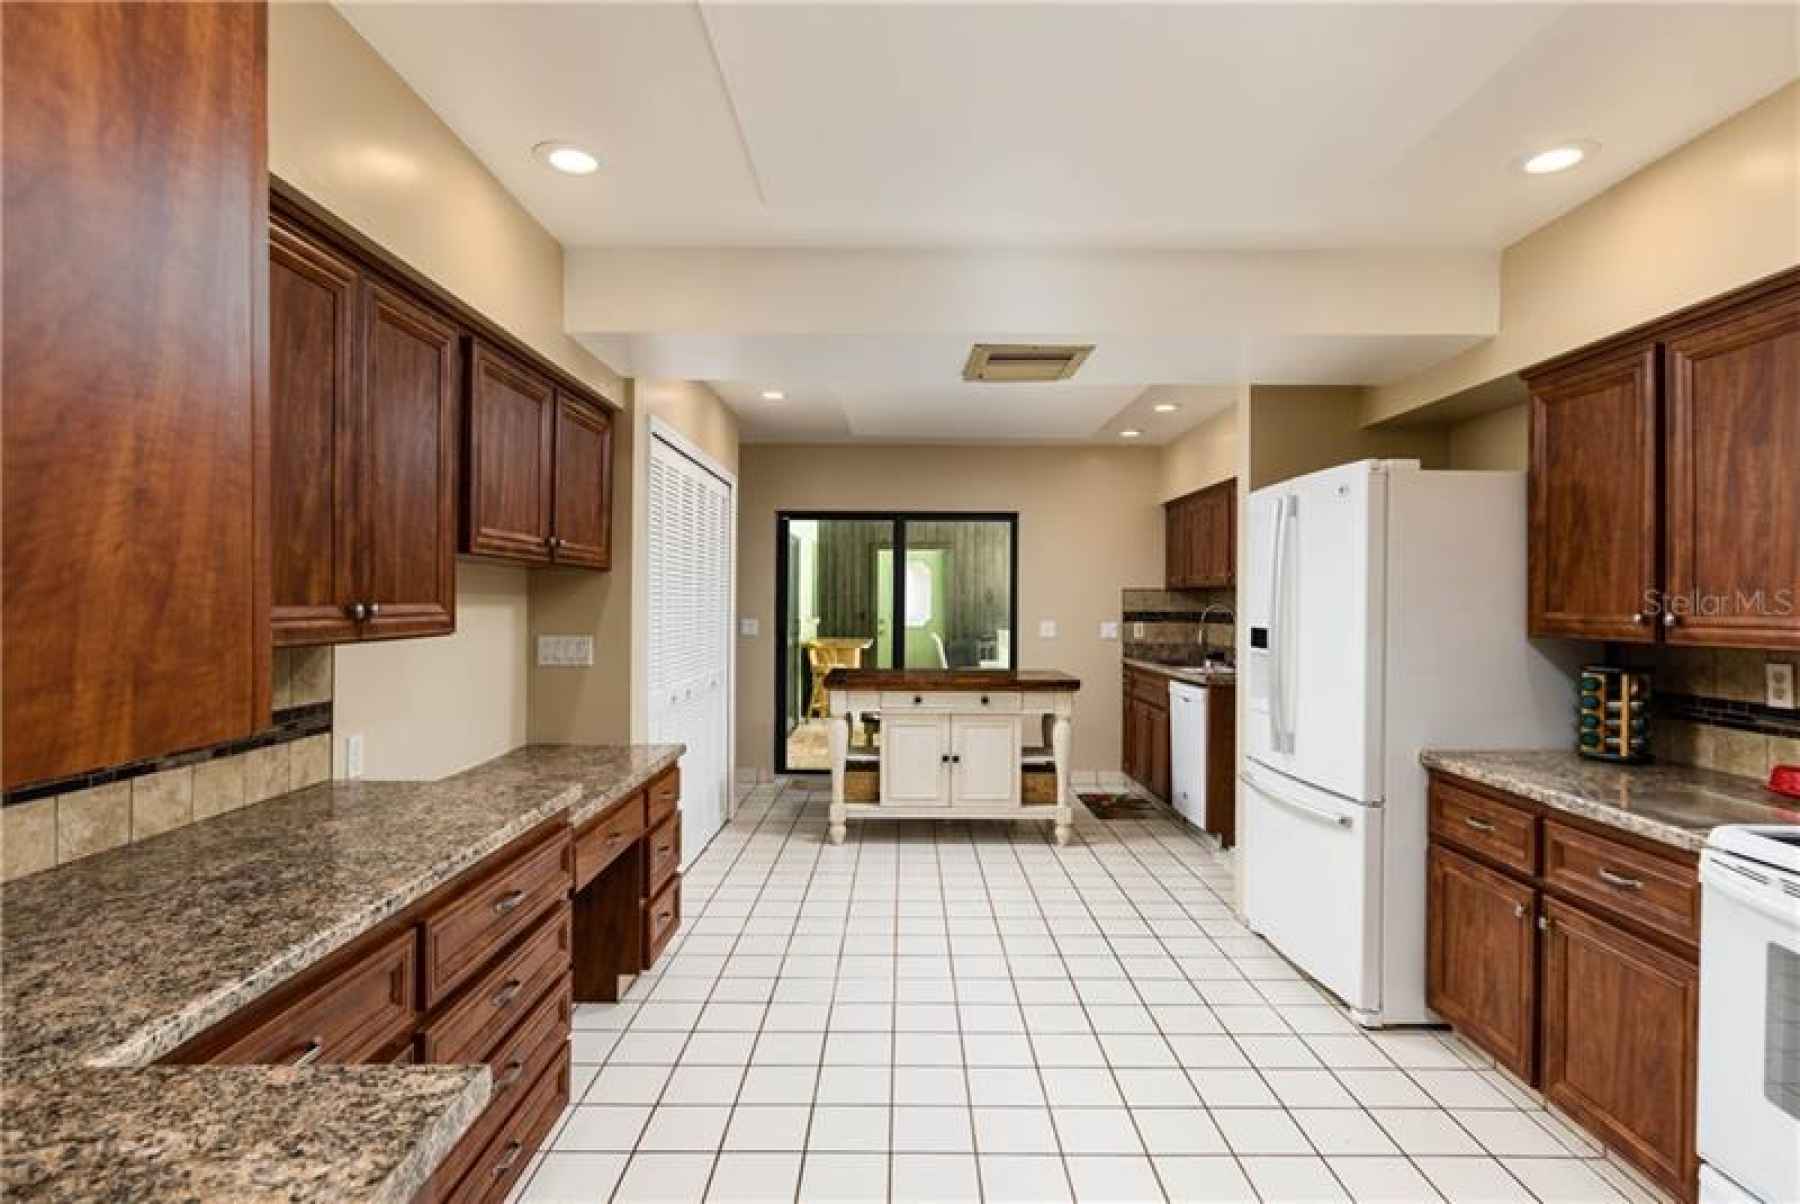 Kitchen with lots of storage and space for entertaining!